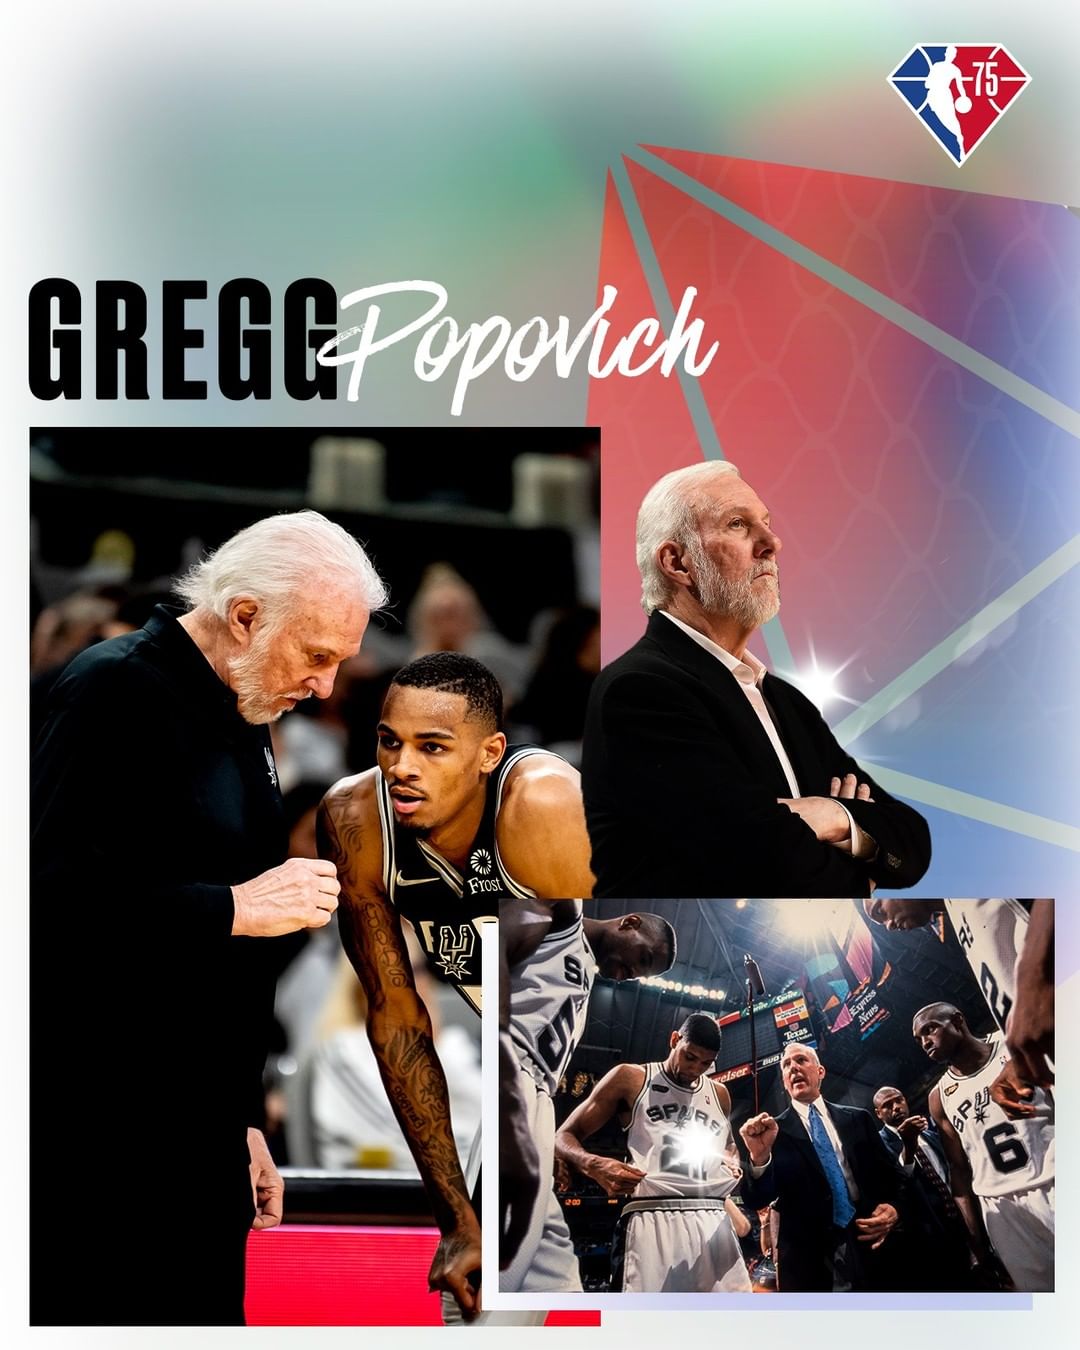 Congrats to Coach Pop on being named one of the top 15 NBA coaches of all-time!
...